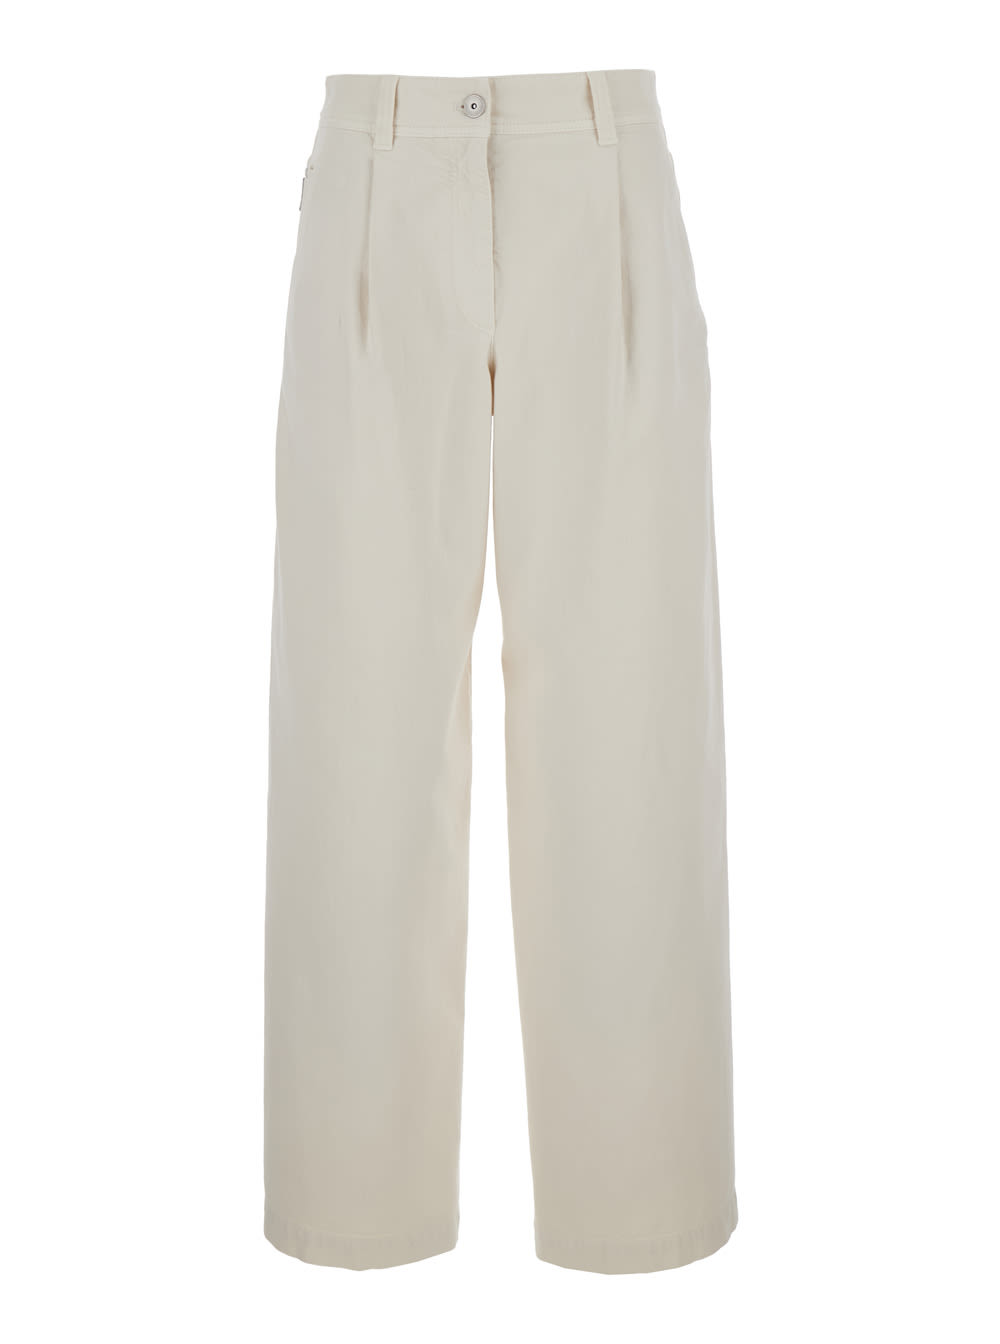 White Baggy Jeans With Button Closure In Stretch Cotton Denim Woman